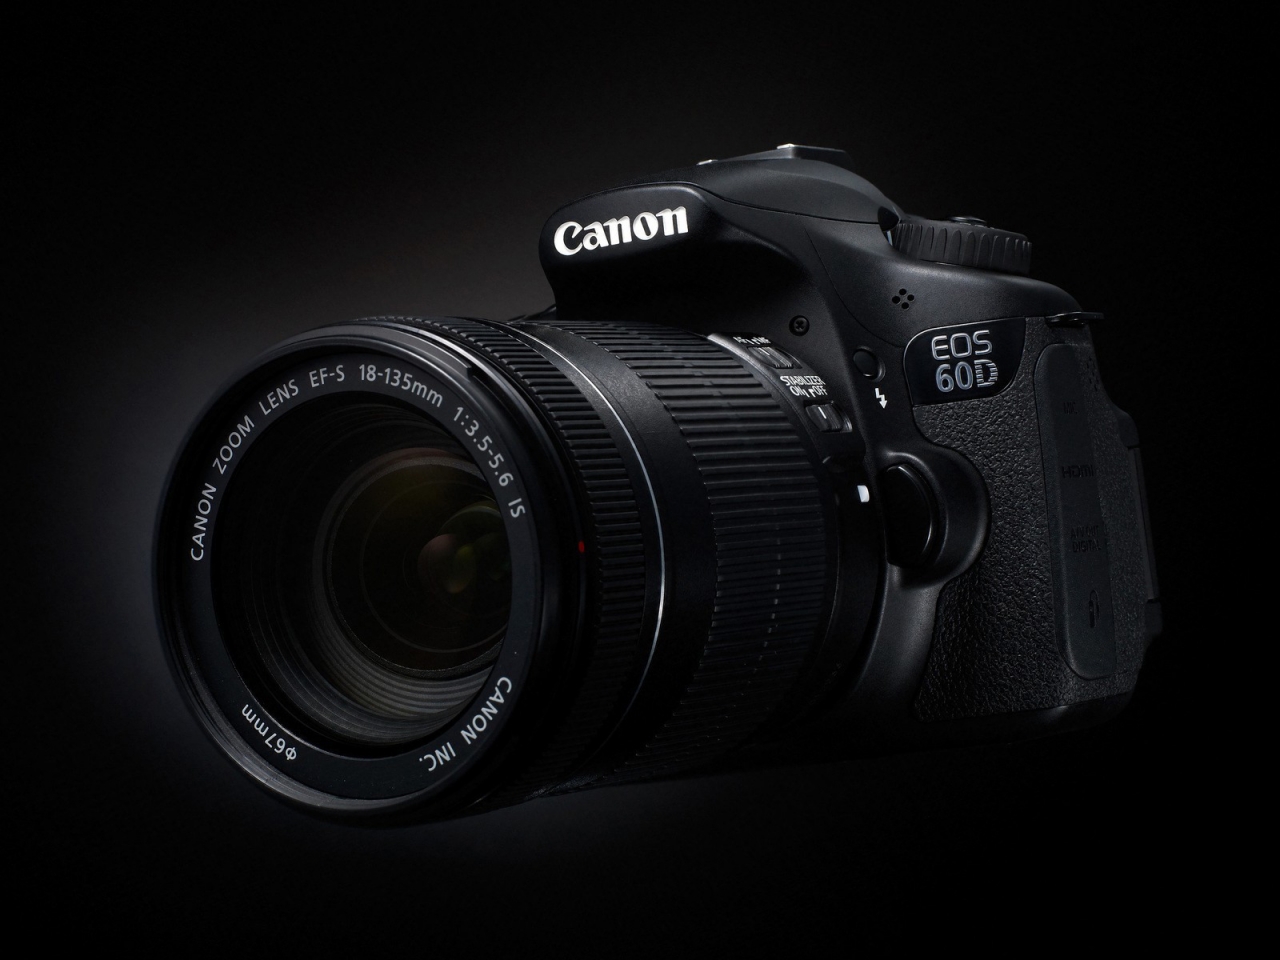 Canon EOS 60D for 1280 x 960 resolution